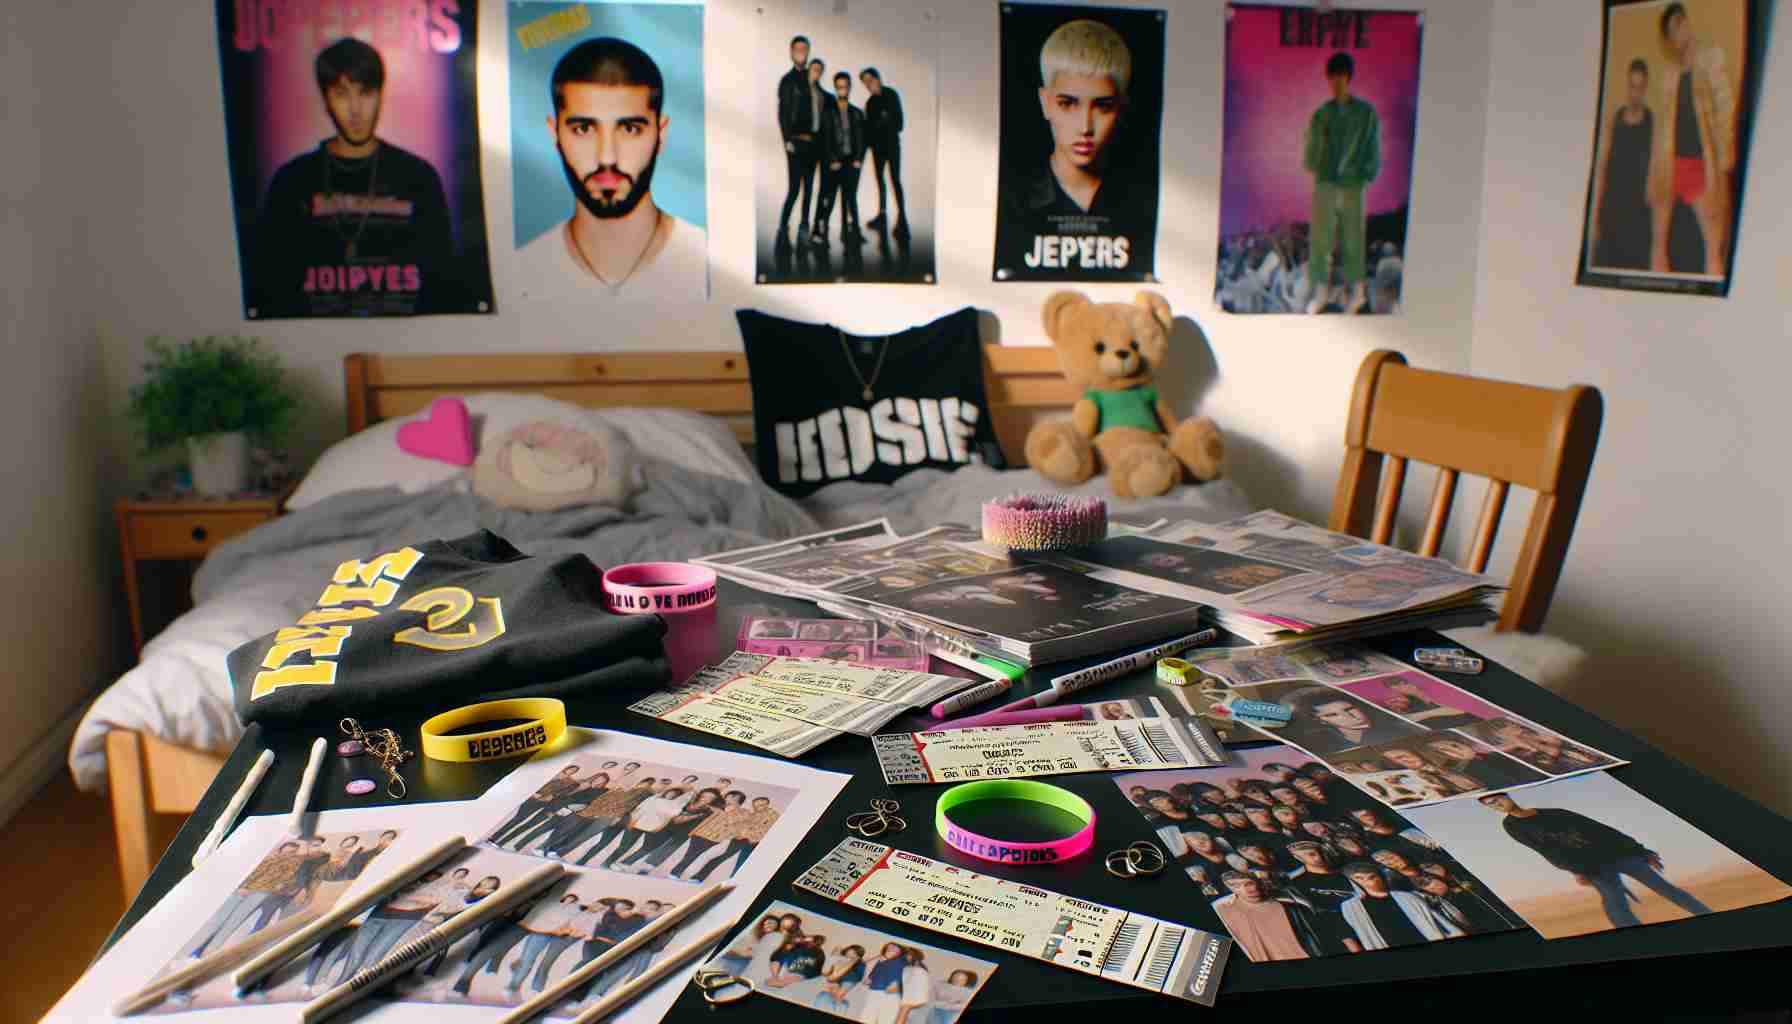 High definition, realistic picture of the quintessential fan experience: Preparing to attend a popular pop music concert. The image includes details such as concert tickets, fan-made posters, merchandise like t-shirts and bracelets, along with a sense of palpable excitement. The setting is domestic, possibly a bedroom with posters of anonymous pop stars.